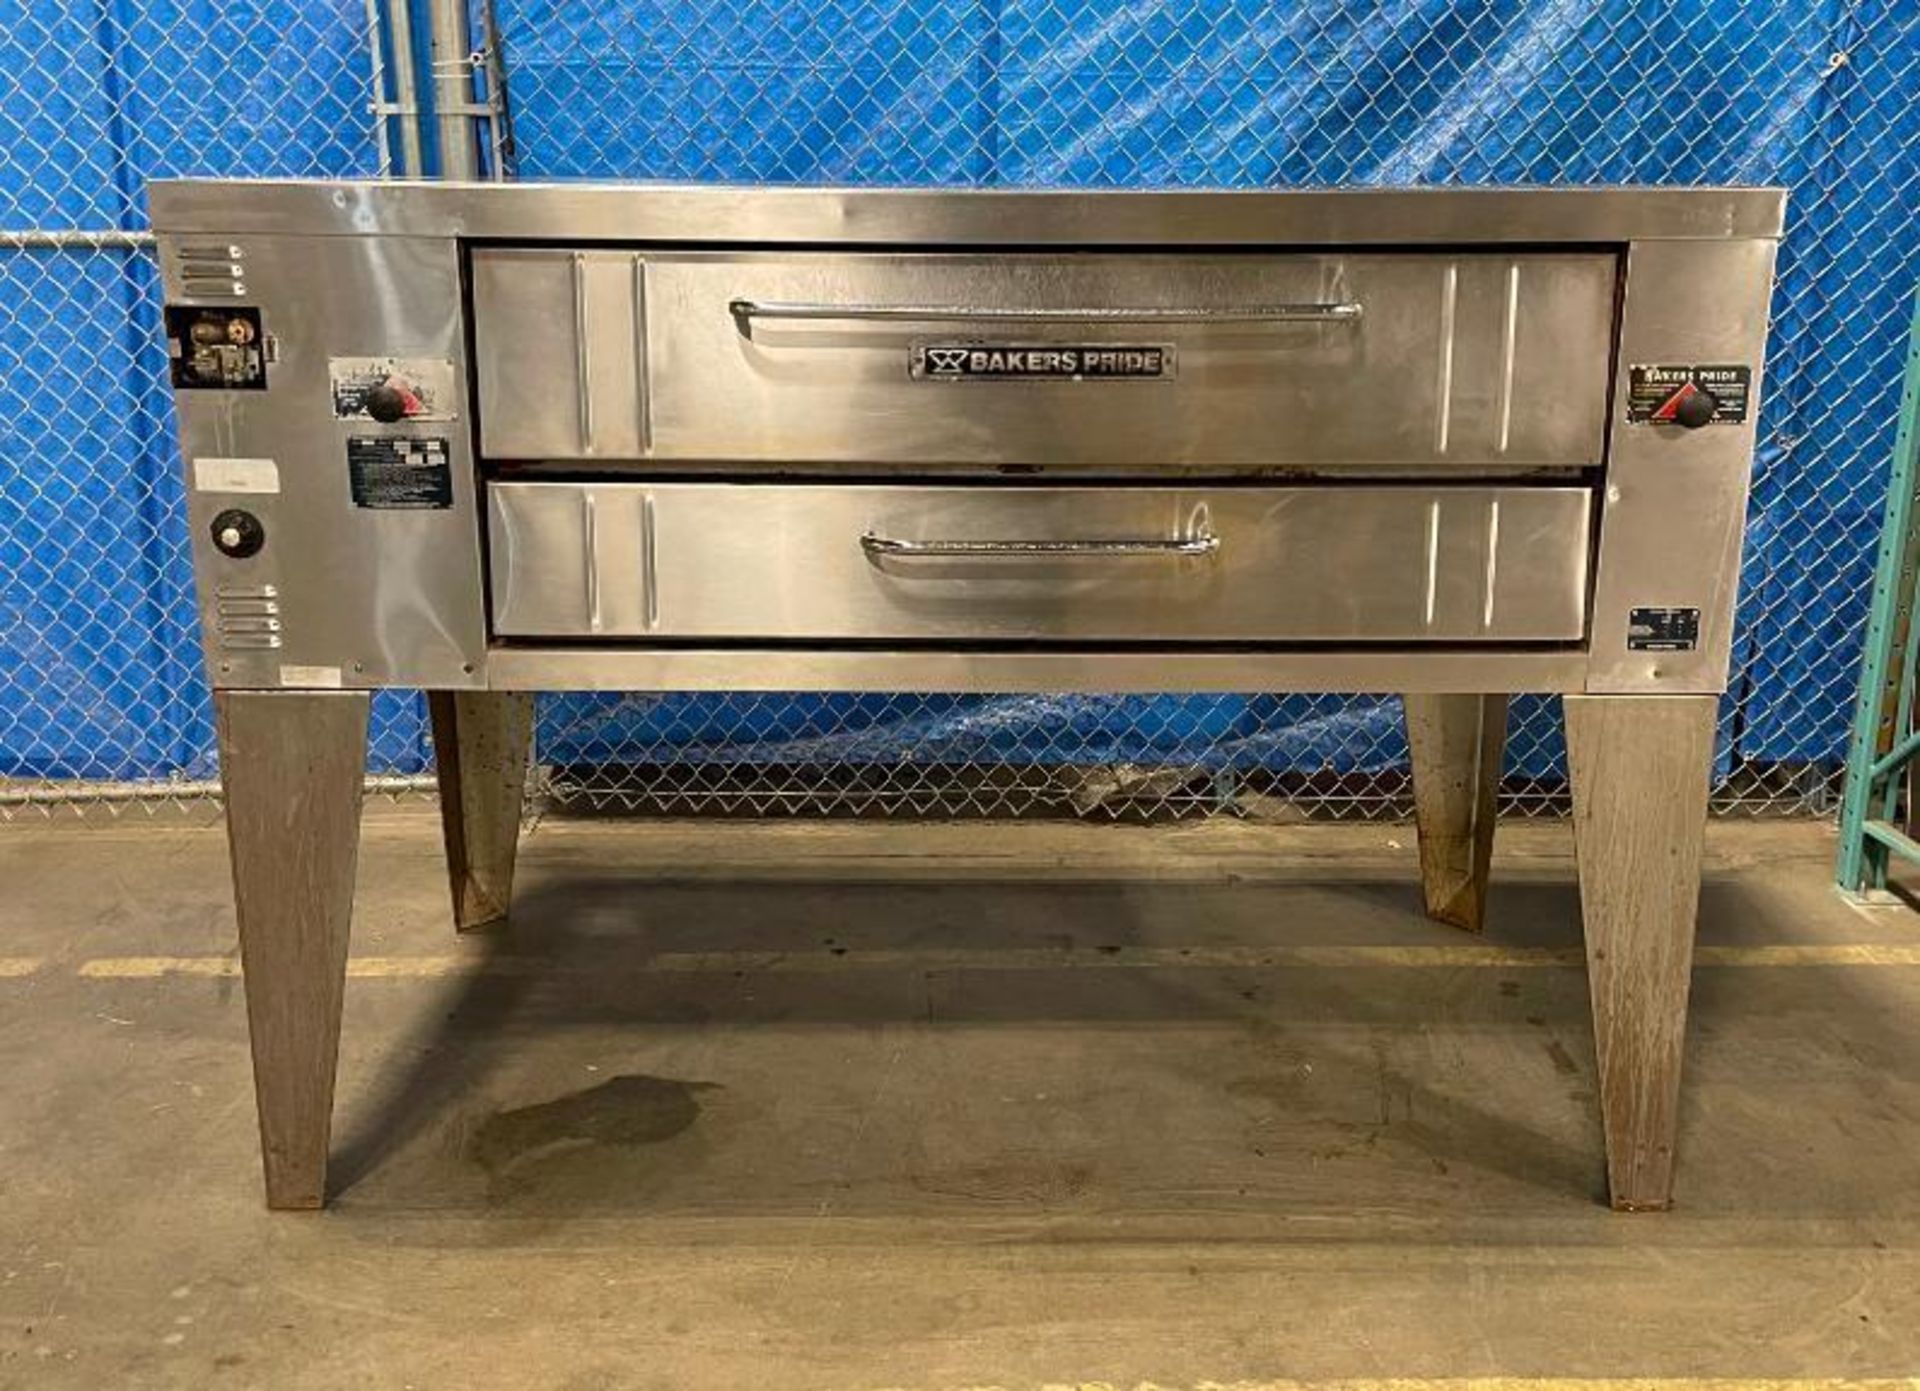 BAKERS PRIDE Y-600 GAS SINGLE DECK PIZZA OVEN - Image 3 of 17